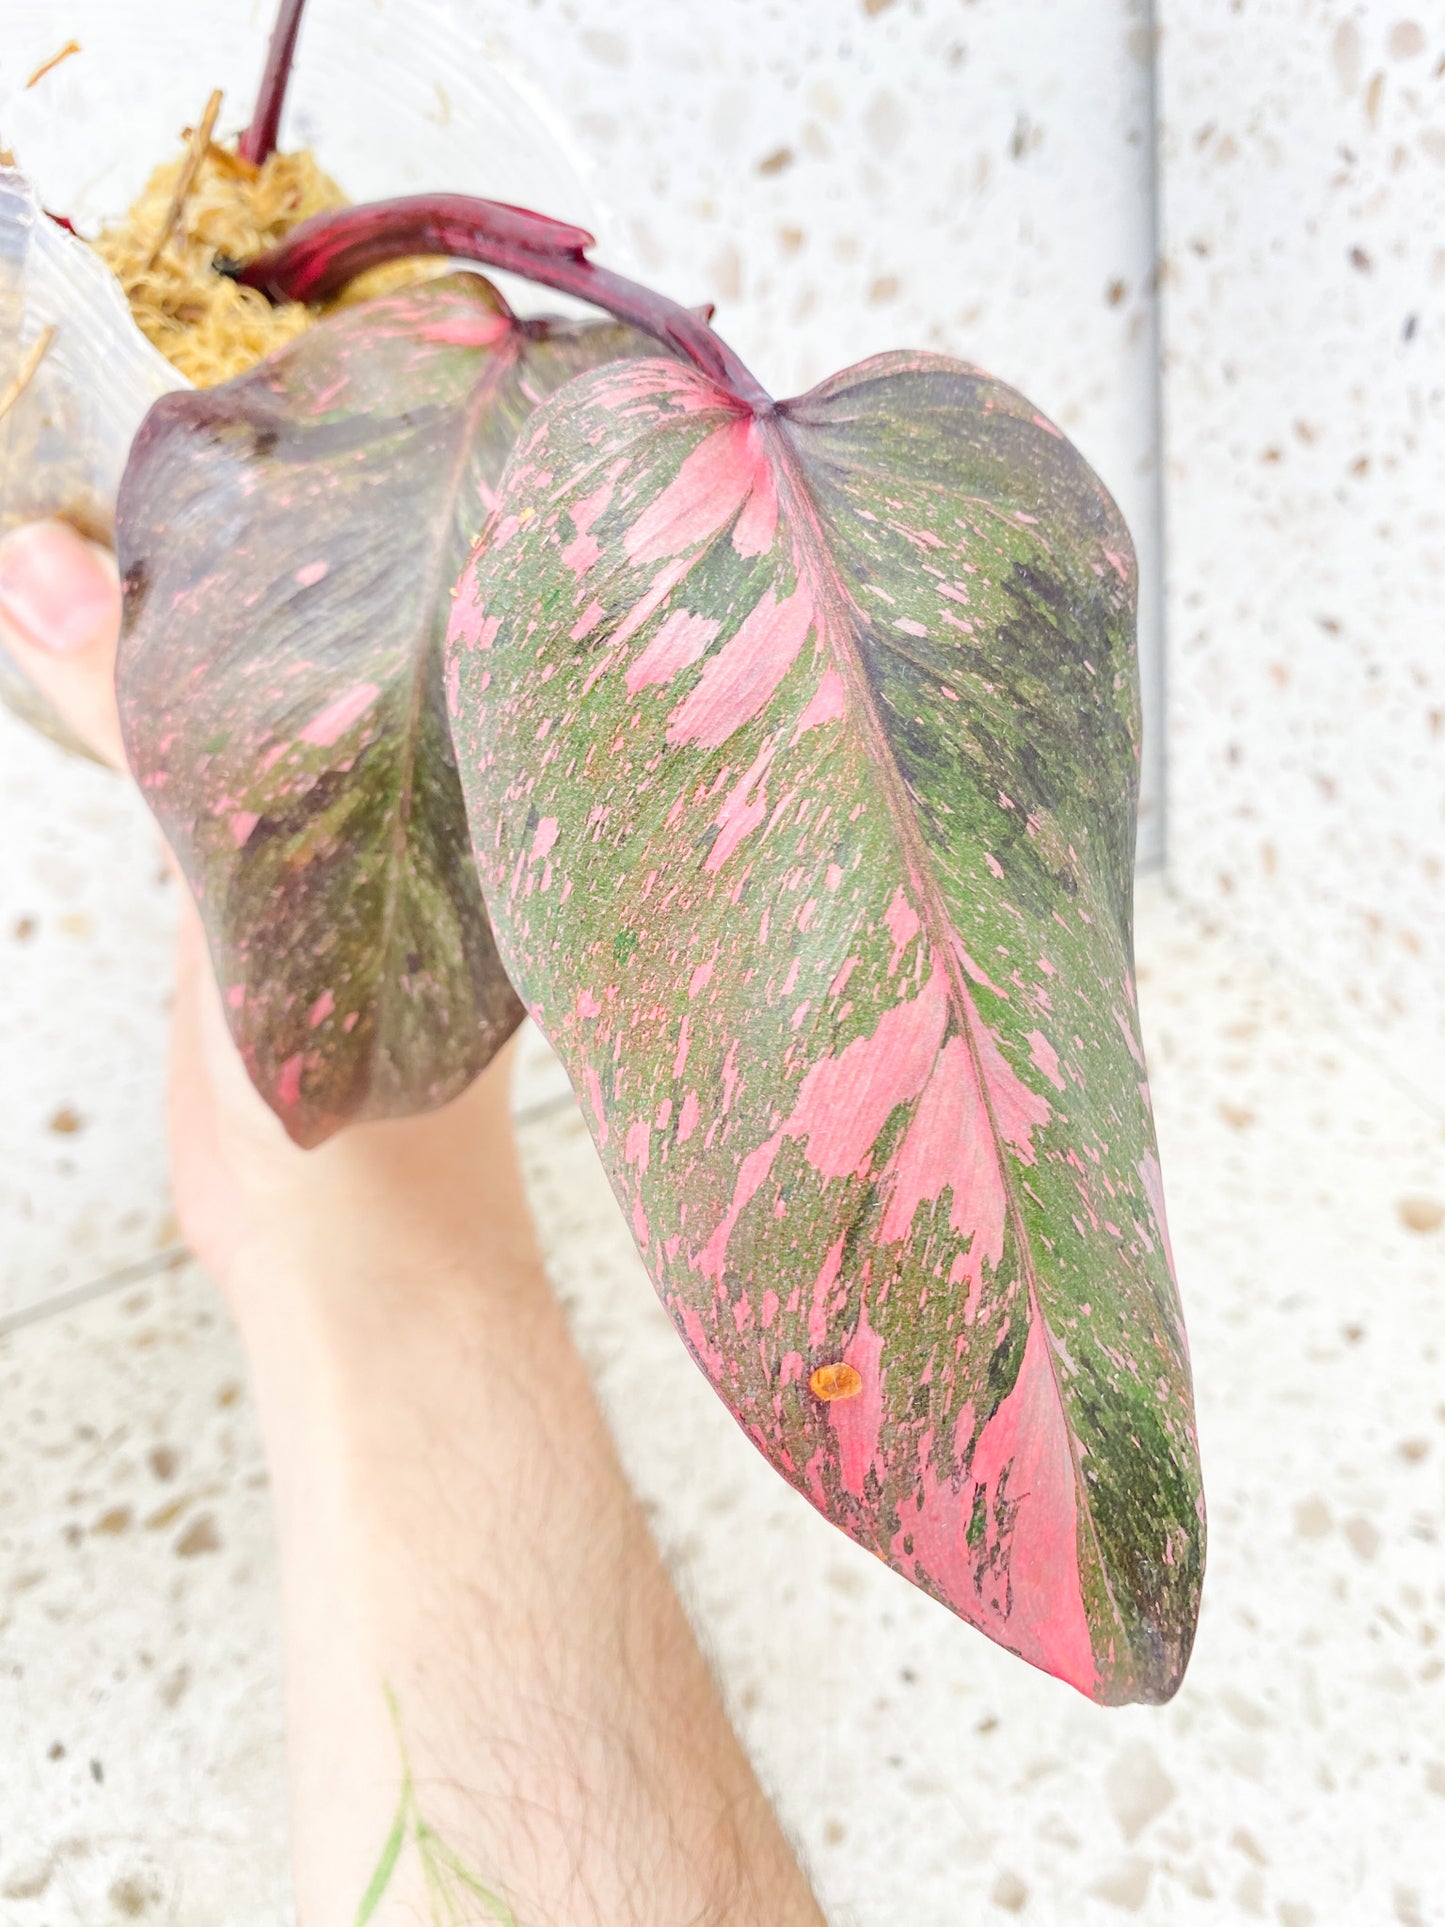 Philodendron Pink Princess Marble King 4 leaf top cutting (rooting)